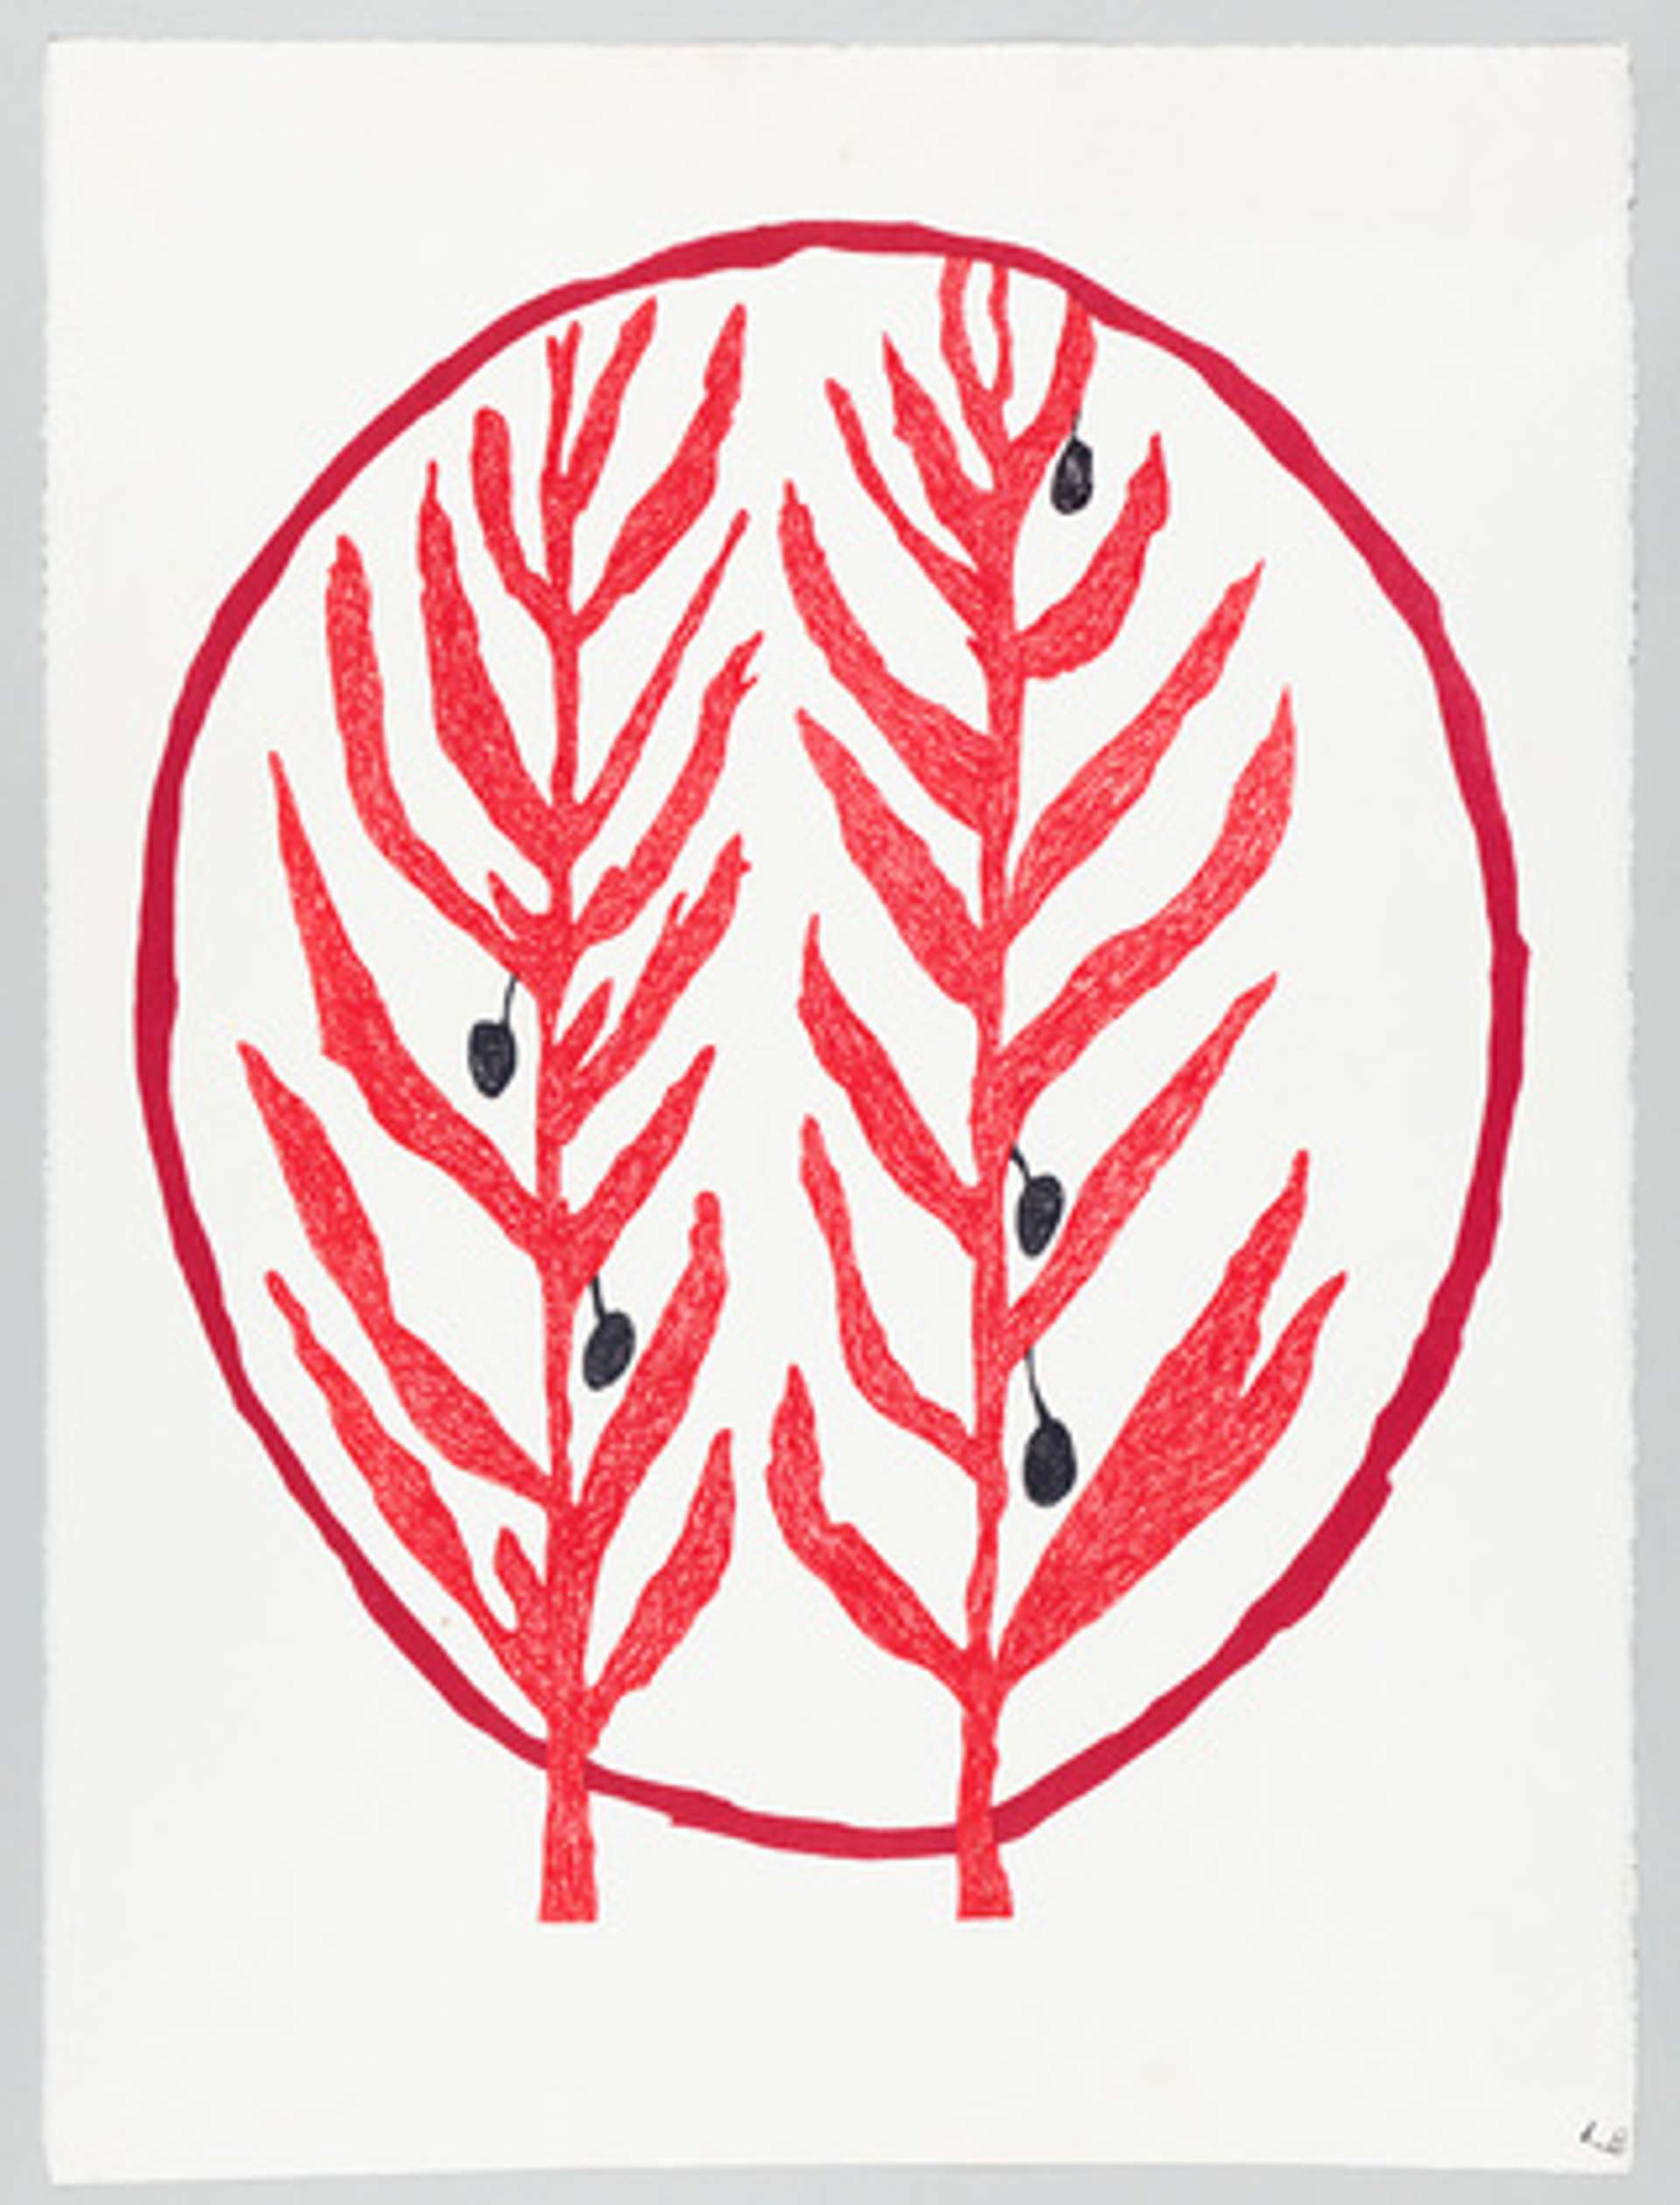 The Olive Branch by Louise Bourgeois (2004). The print features two upright olive branches in red, against  a red oval.  The olives are drawn in black.